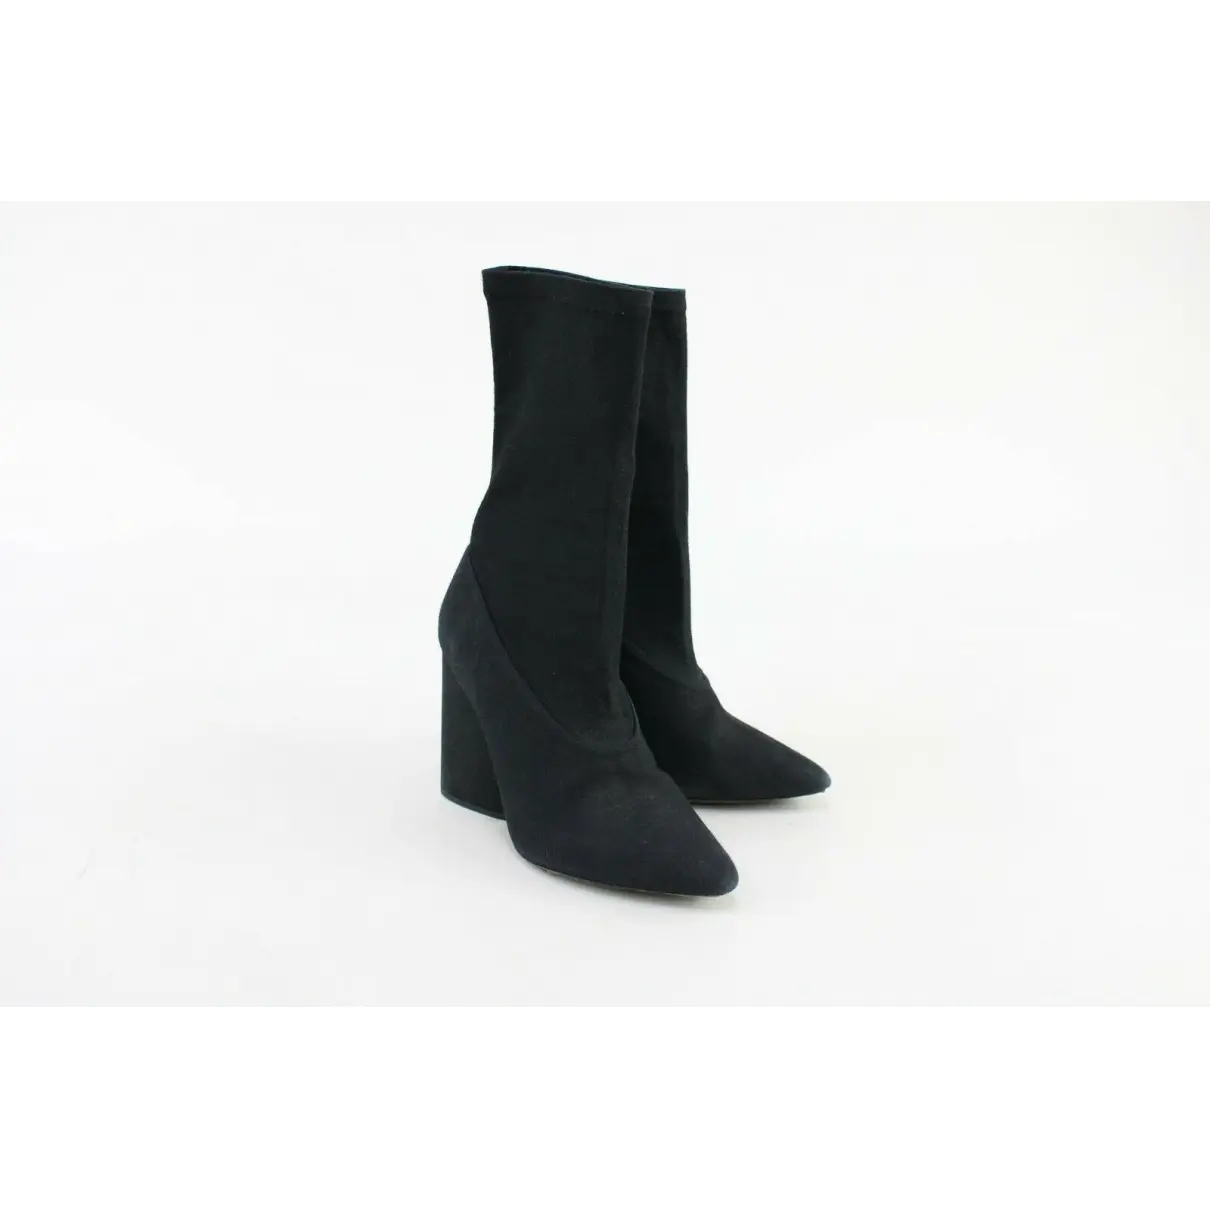 Buy Yeezy Cloth ankle boots online